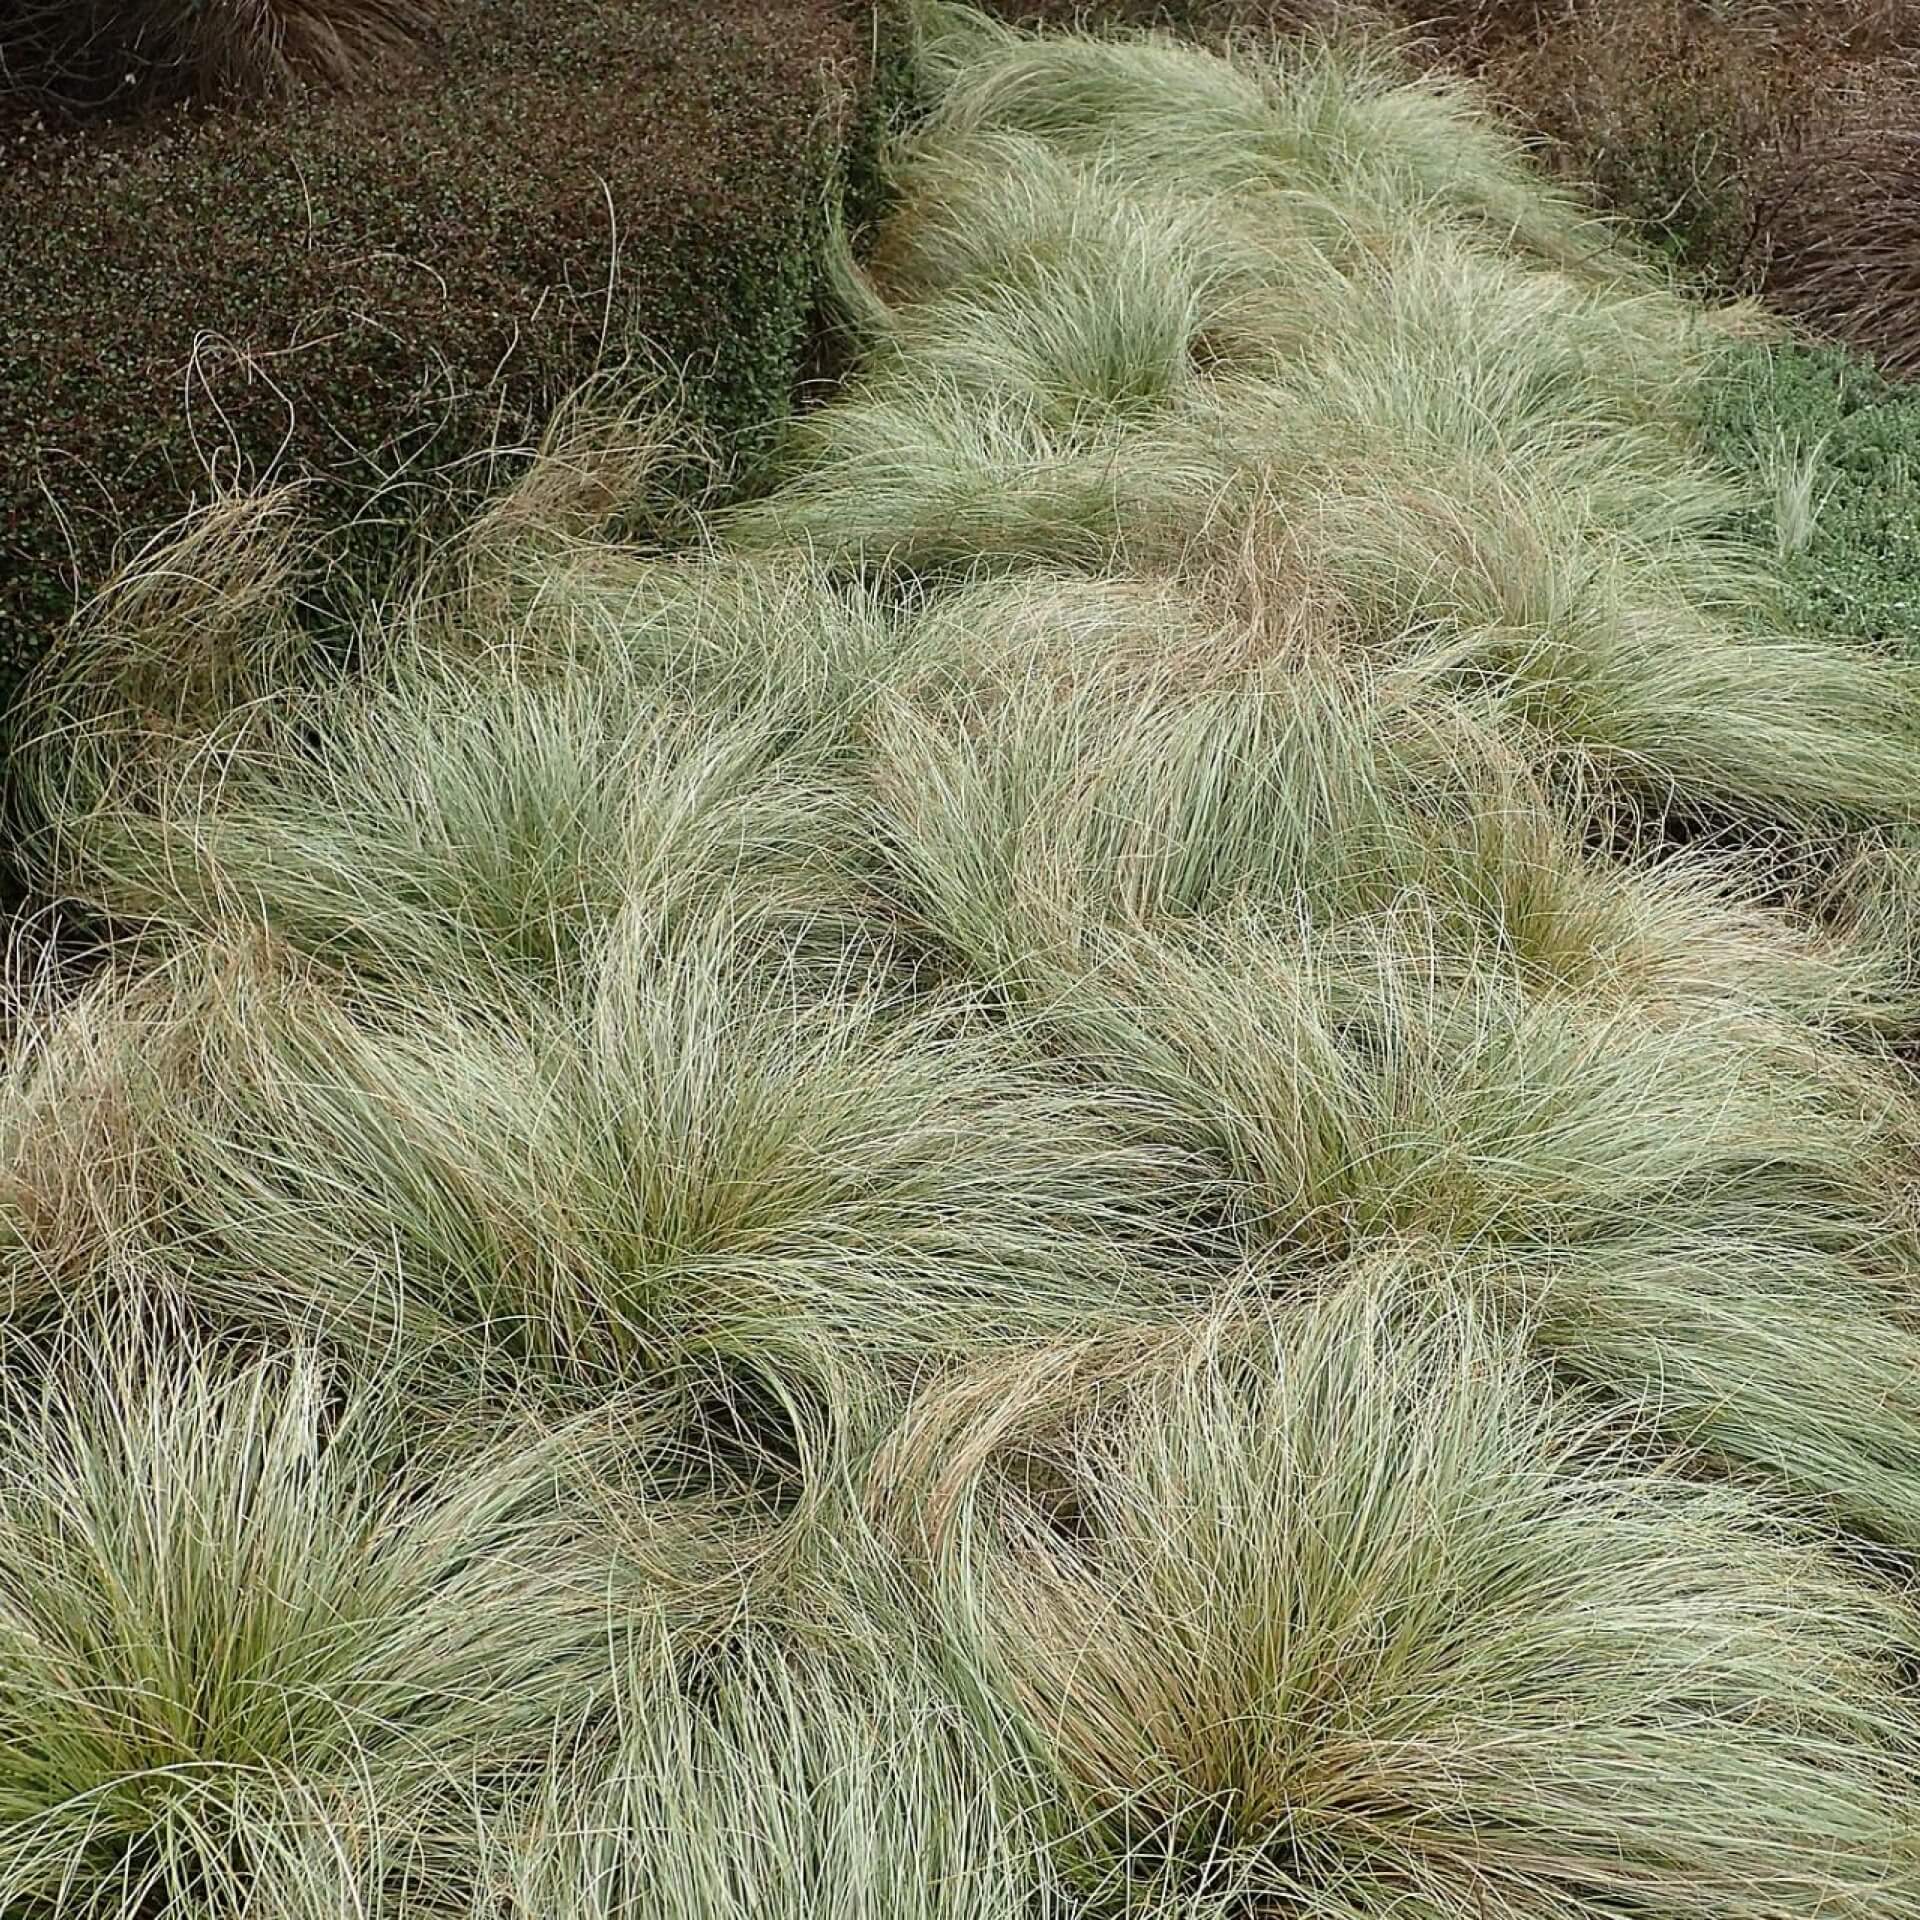  Neuseeländische Segge  'Frosted Curls' (Carex comans 'Frosted Curls')